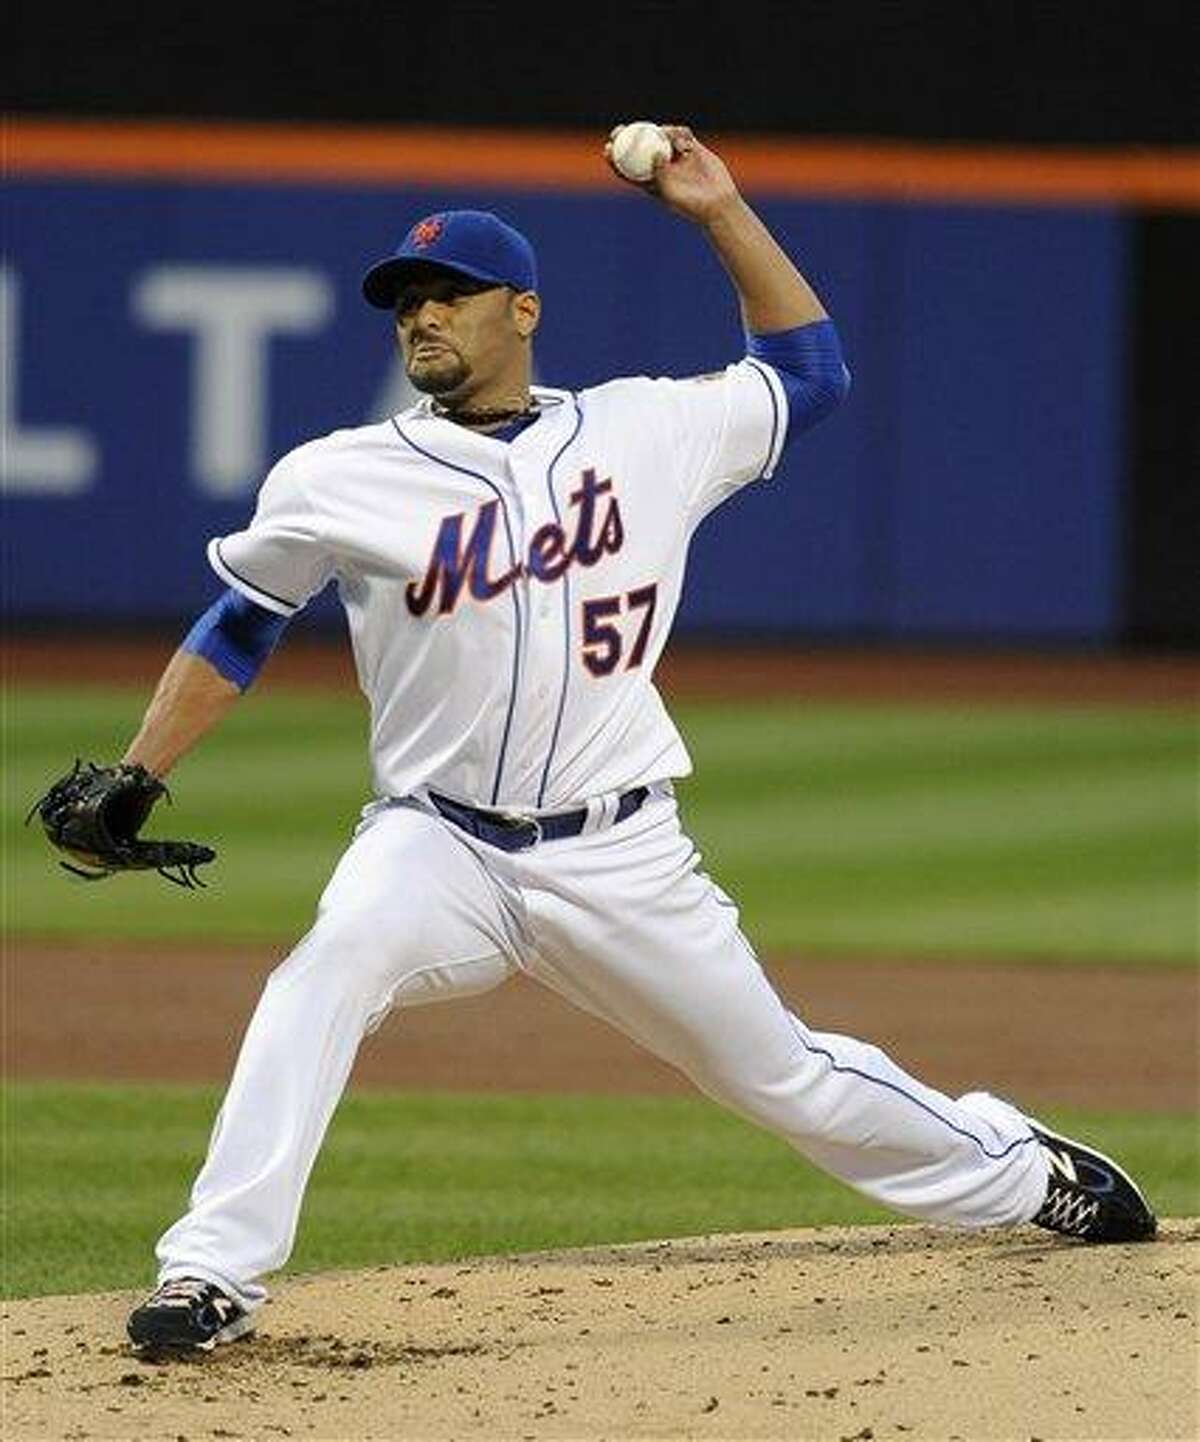 New York Mets starting pitcher Johan Santana (57) throws against the St. Louis Cardinals in the second inning of a baseball game on Friday, June 1, 2012, at Citi Field in New York. (AP Photo/Kathy Kmonicek)